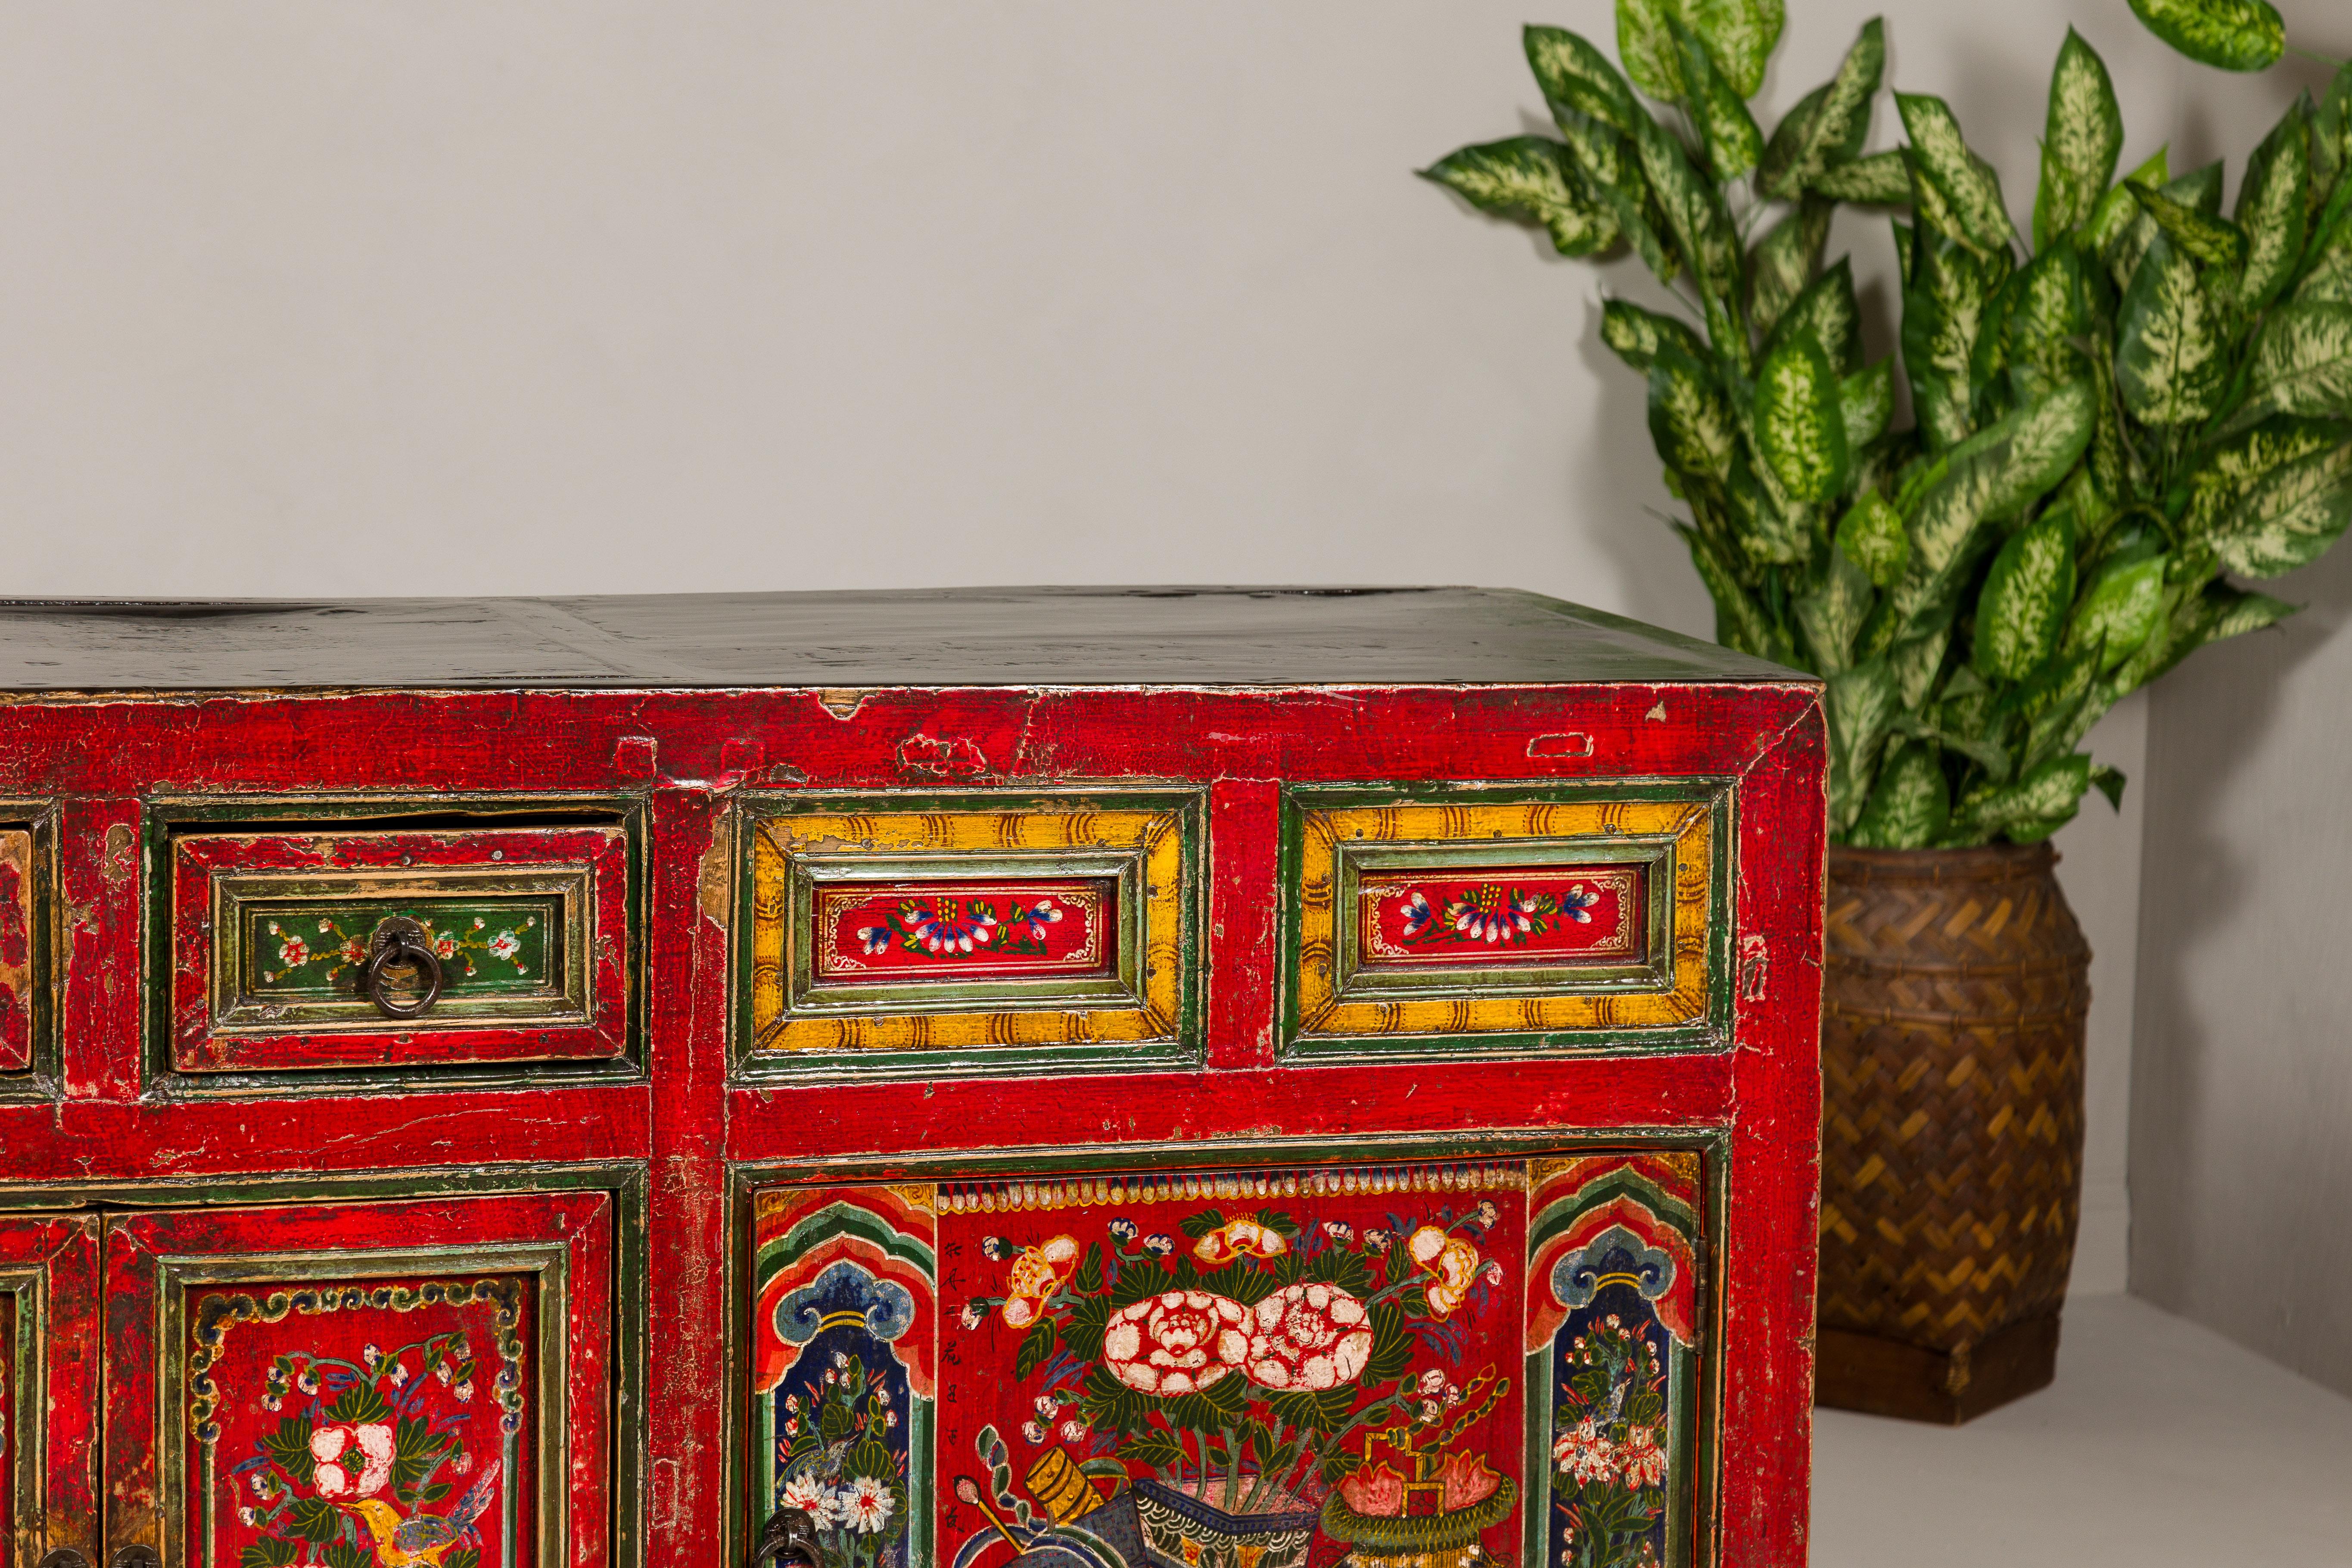 19th Century Mongolian Polychrome Sideboard with Doors, Drawers and Floral Décor 5